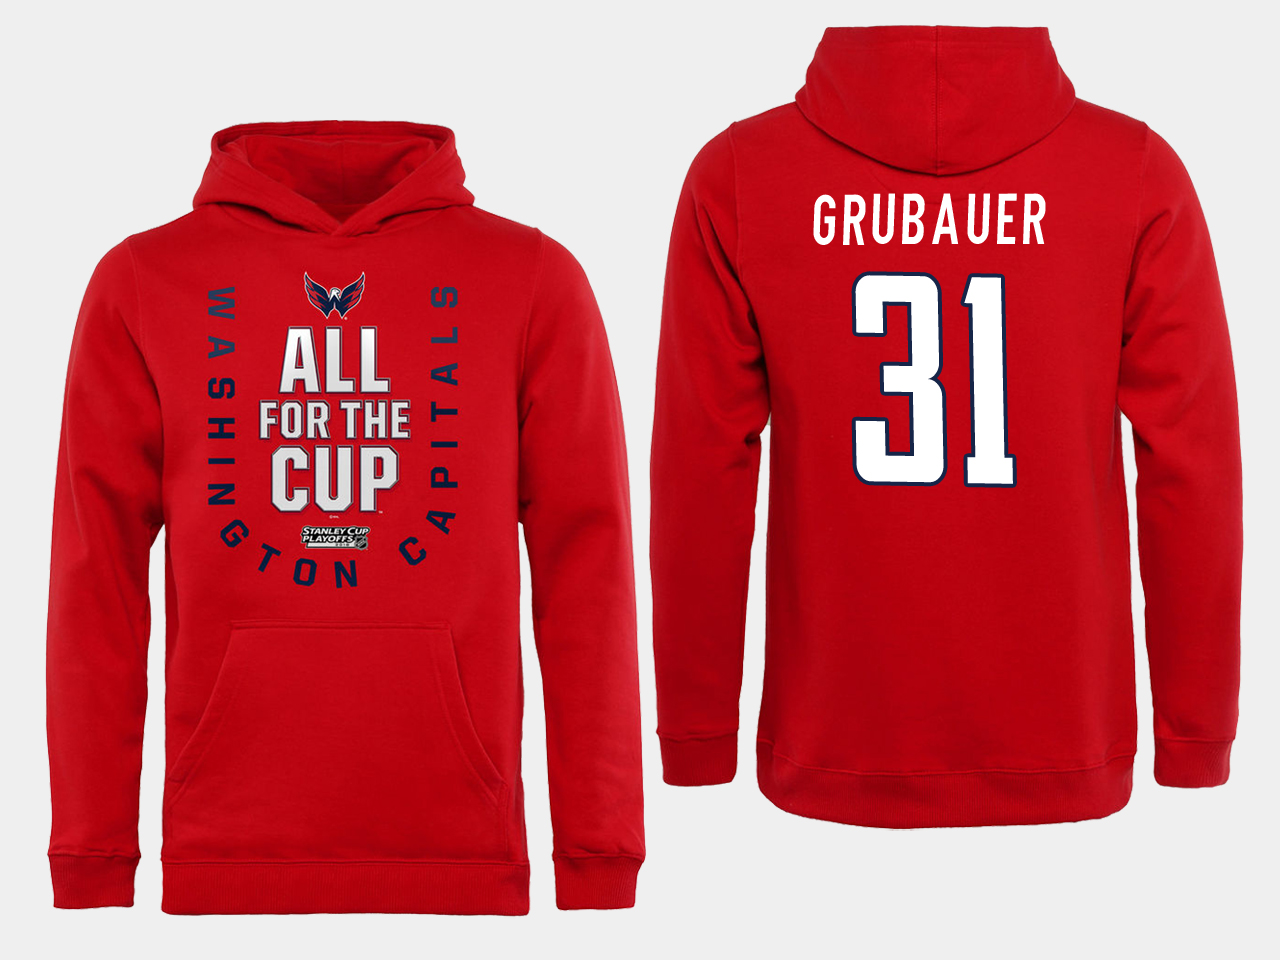 Men NHL Washington Capitals #31 grubauer Red All for the Cup Hoodie